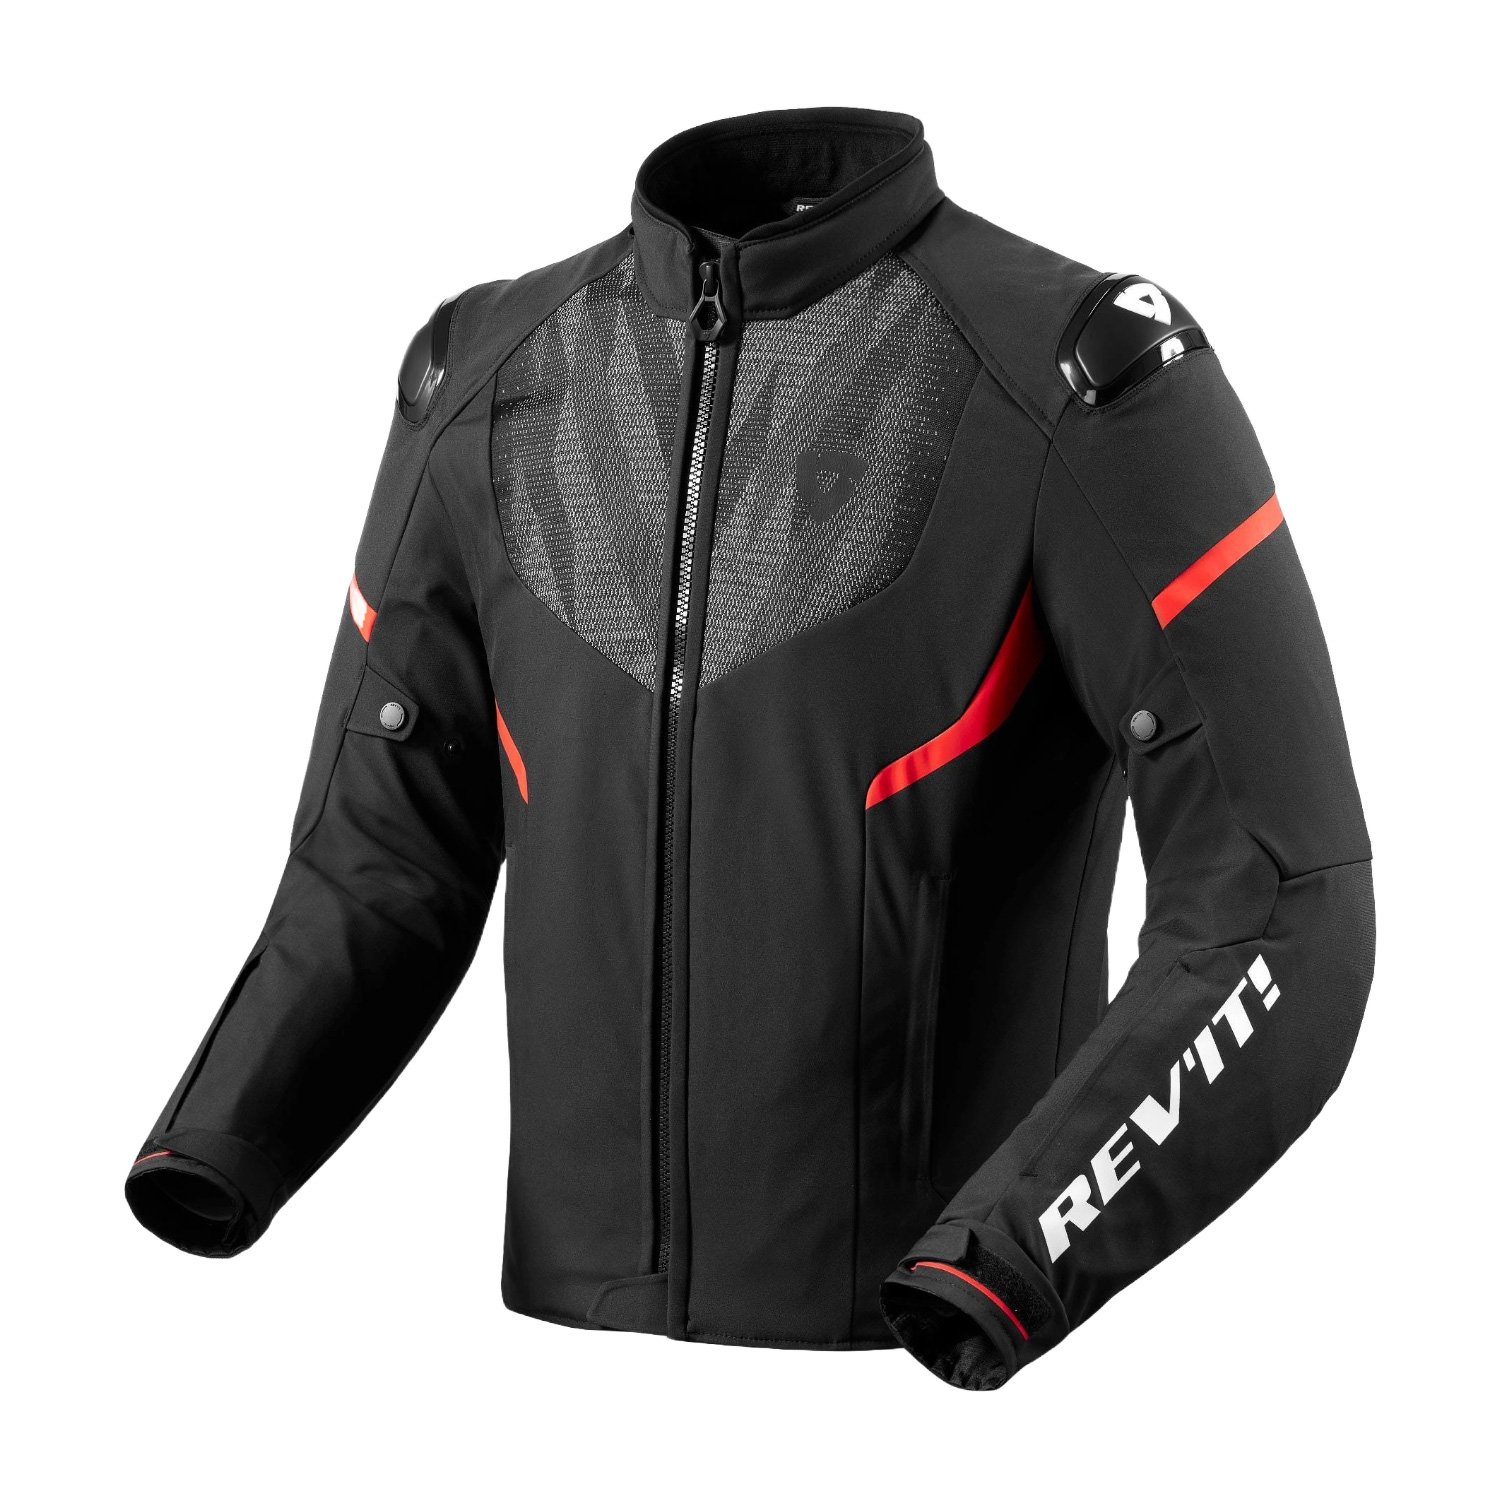 Image of REV'IT! Hyperspeed 2 H2O Jacket Black Neon Red Size 2XL ID 8700001367264